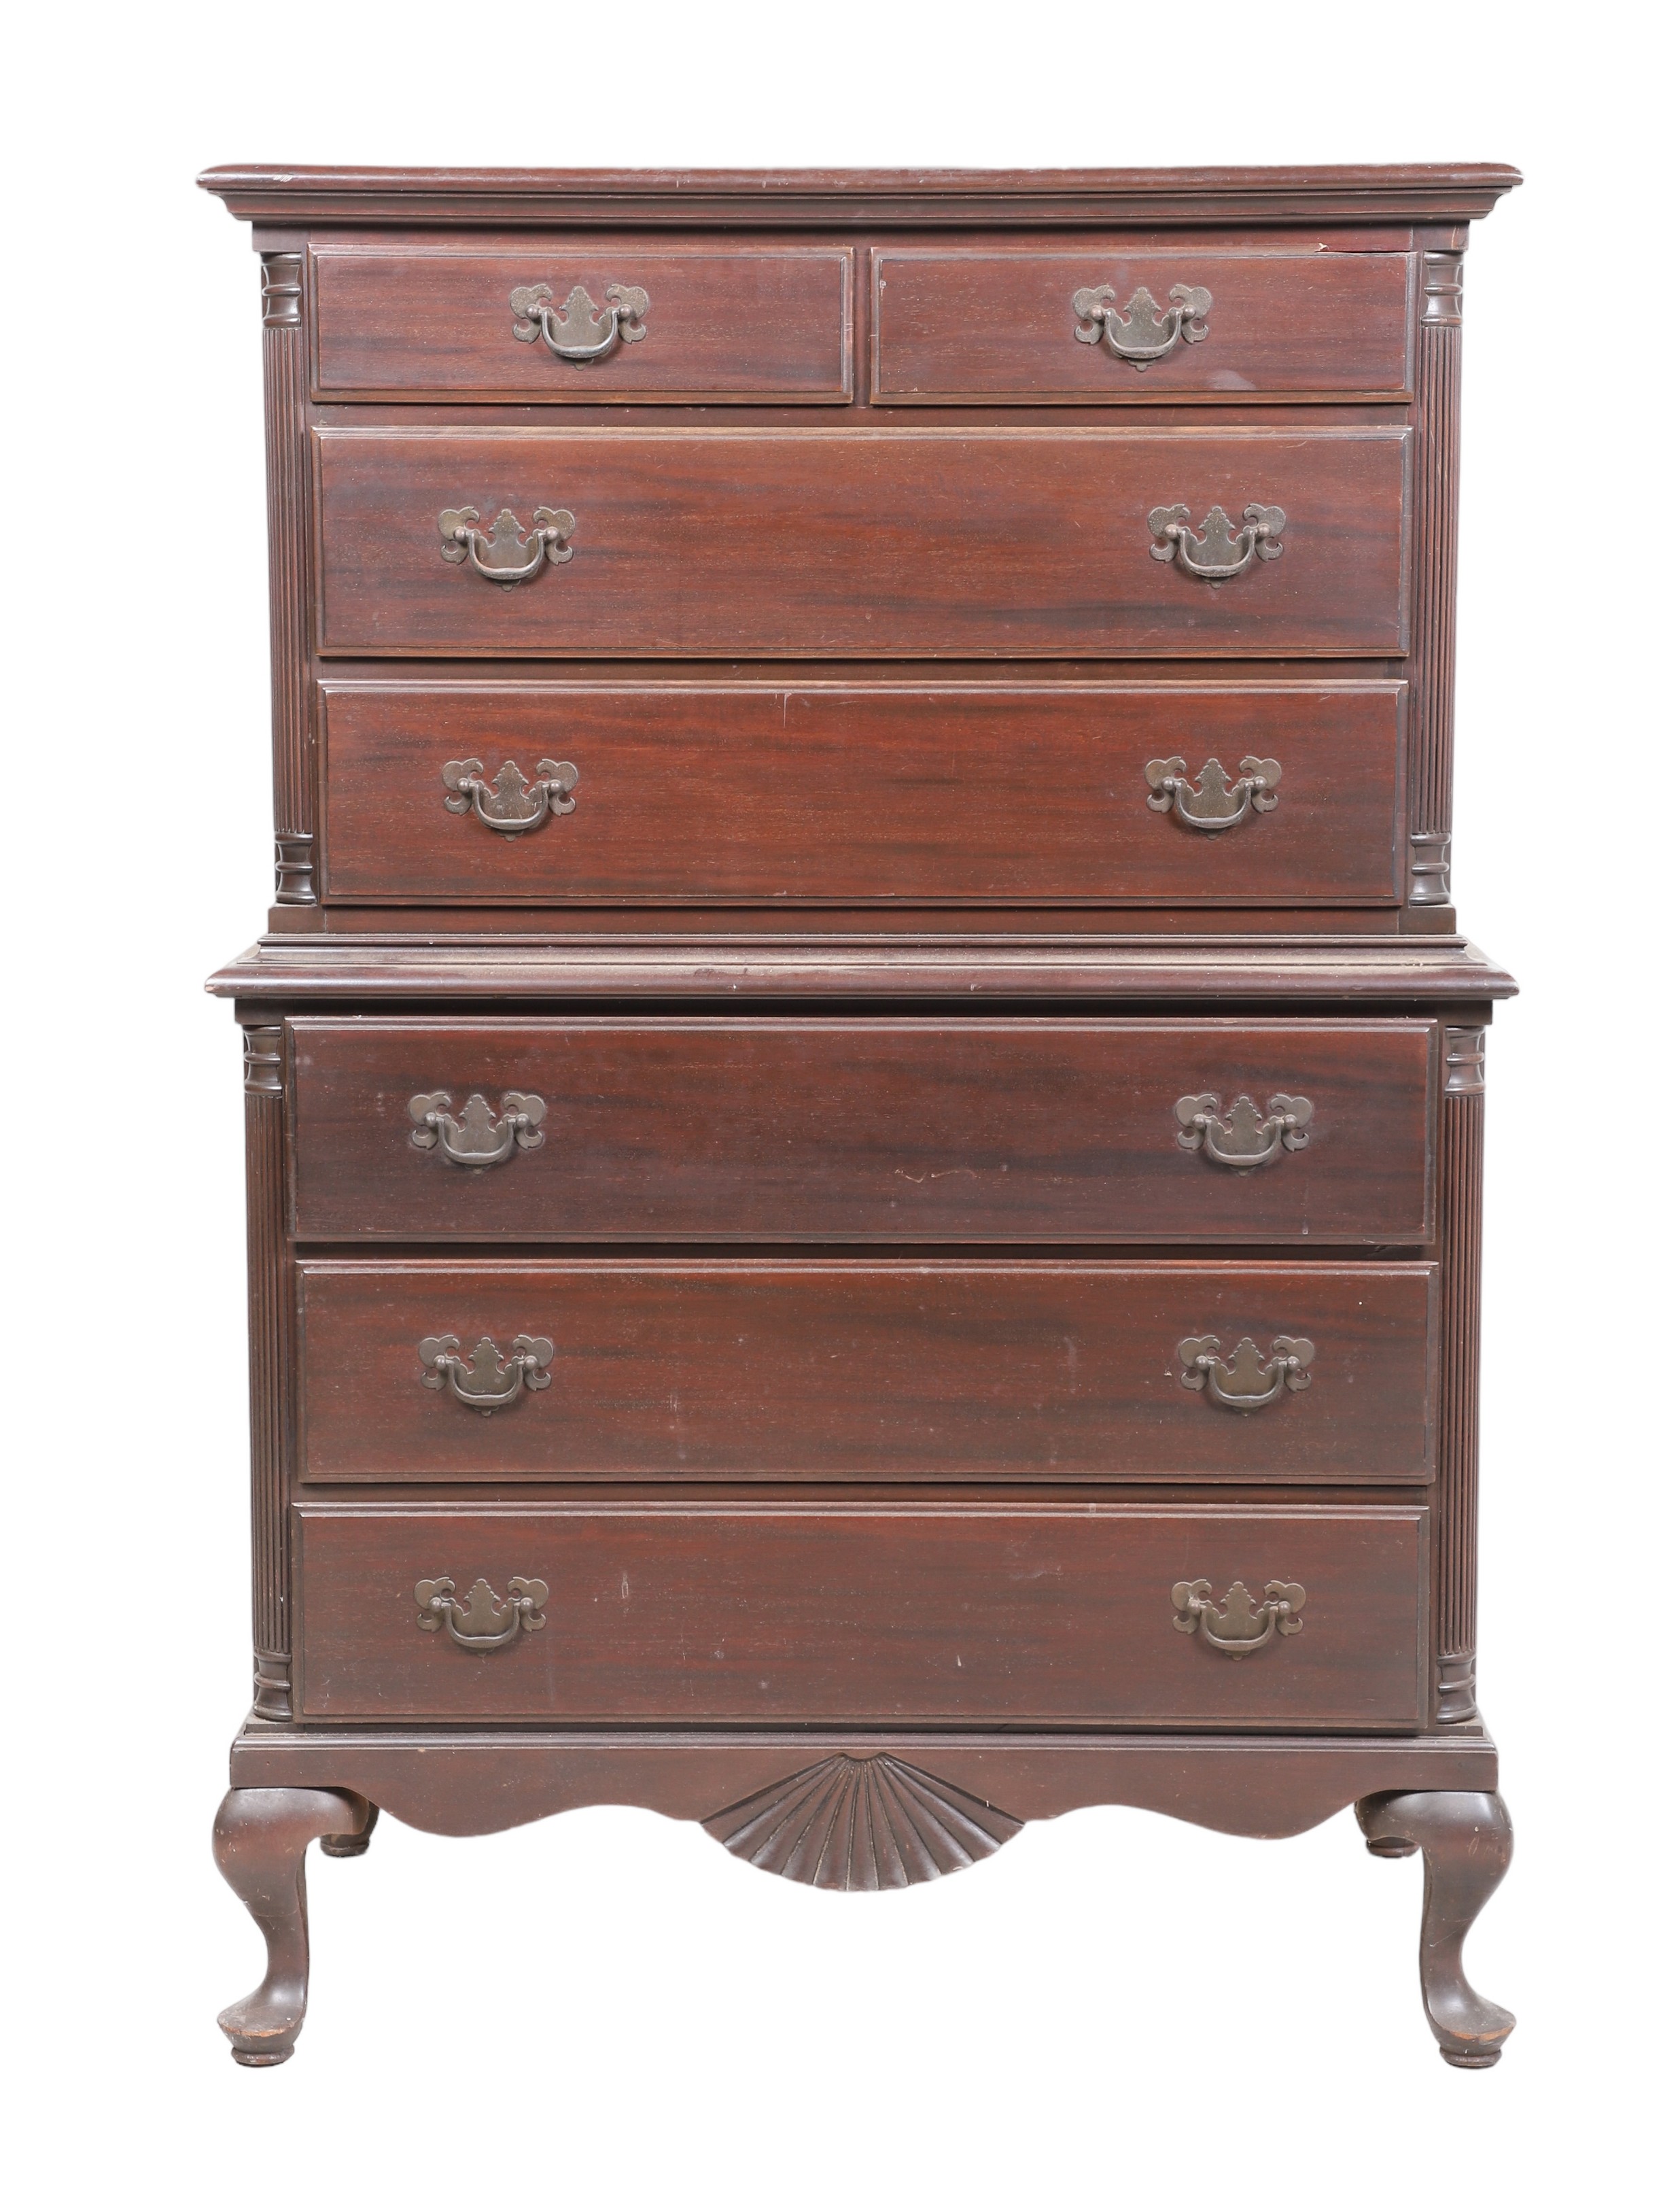 Queen Anne style mahogany chest